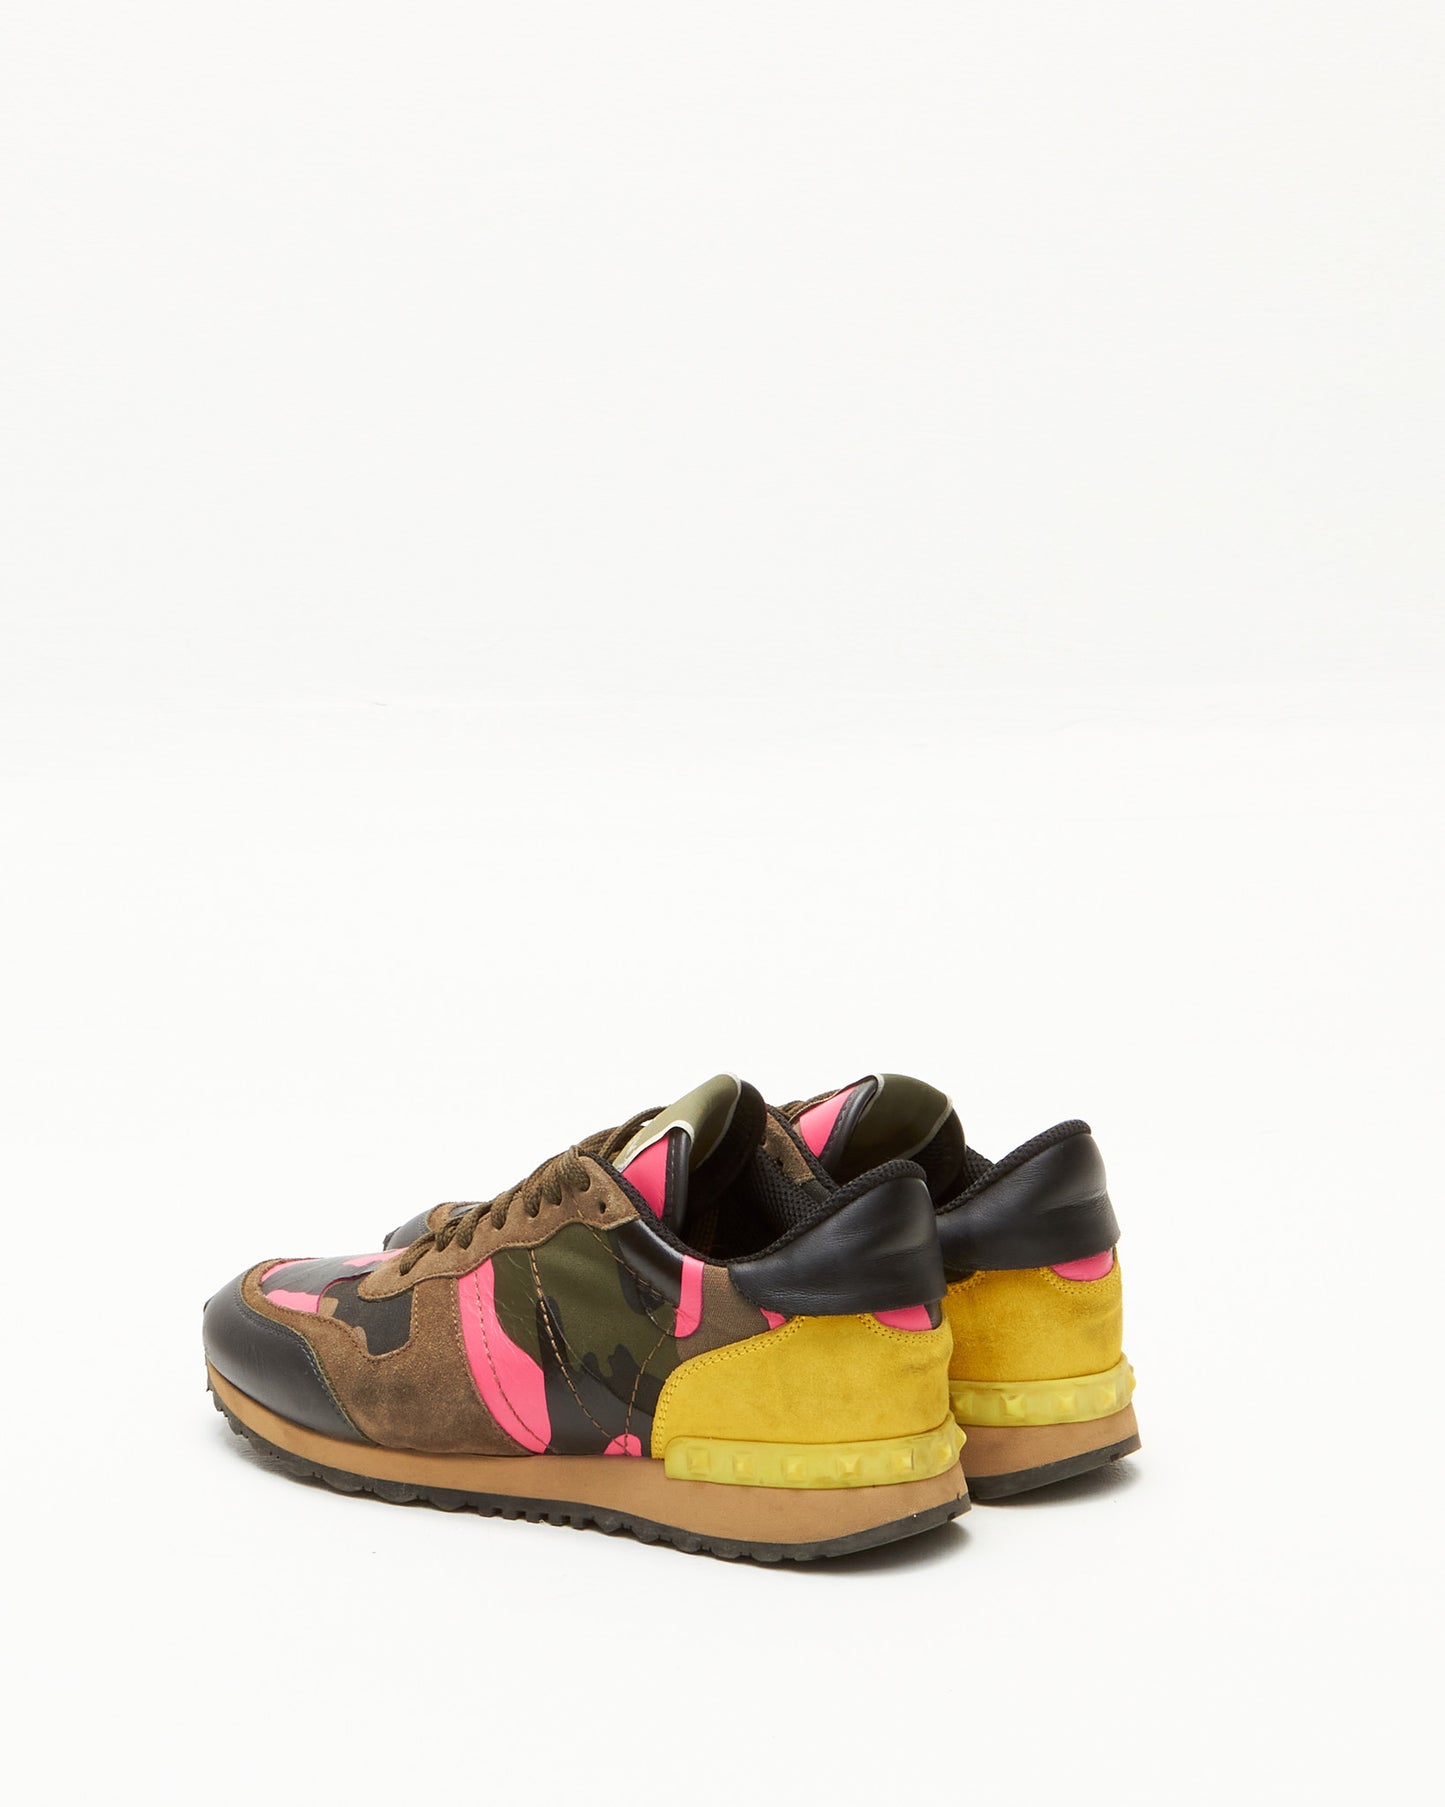 Valentino Green Multi Color Rockrunner Sneakers -37